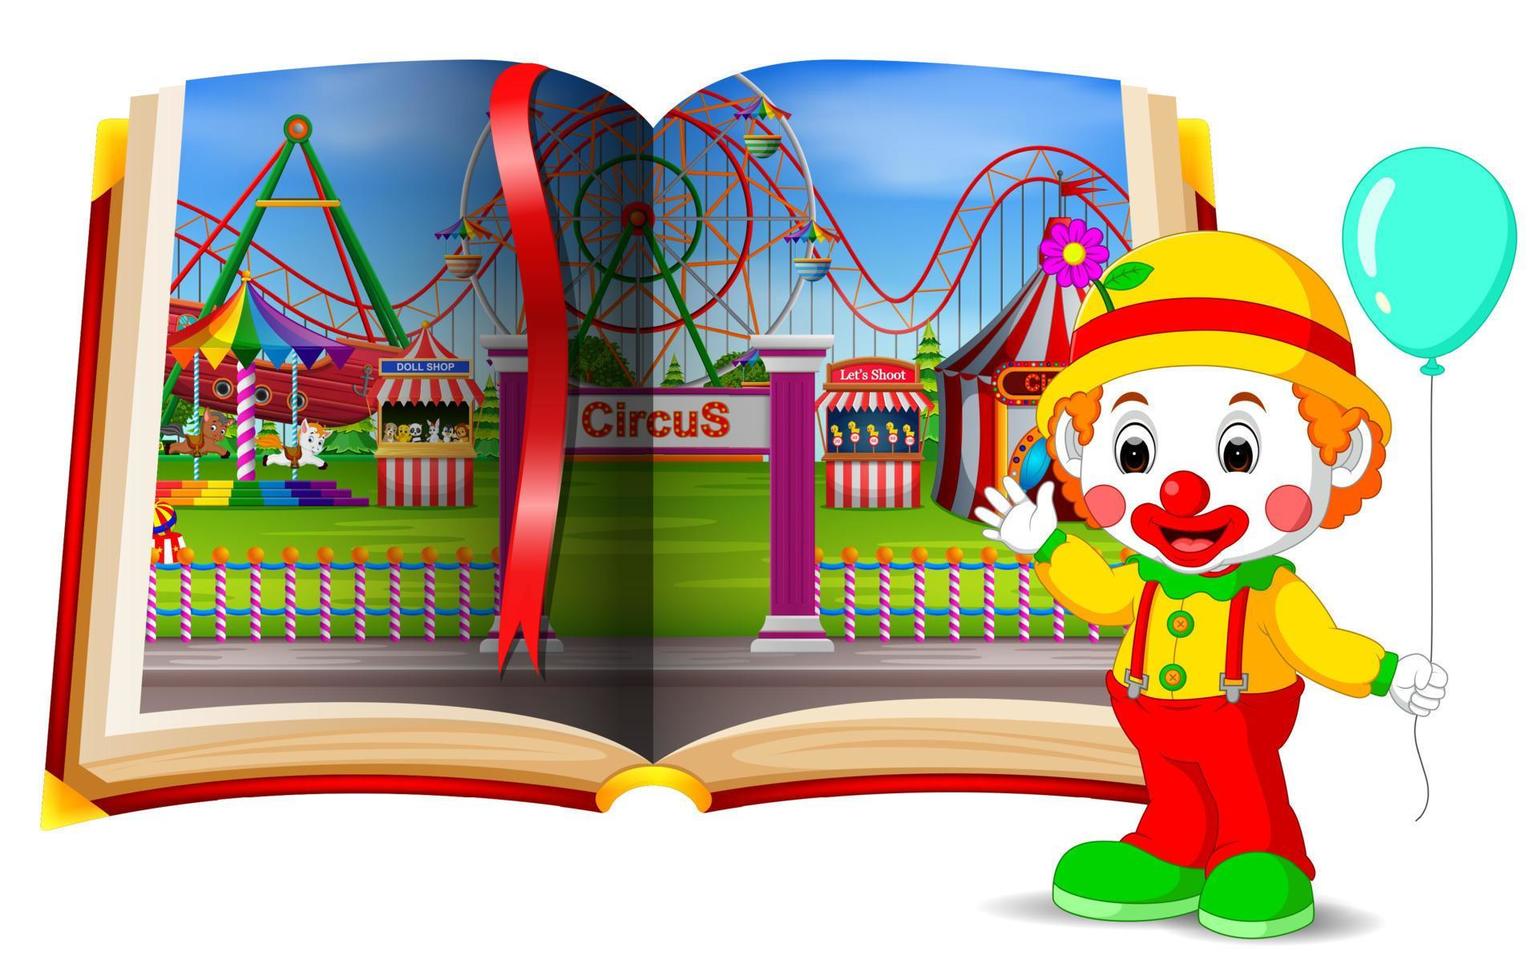 Amusement park scenery in the book and clown vector